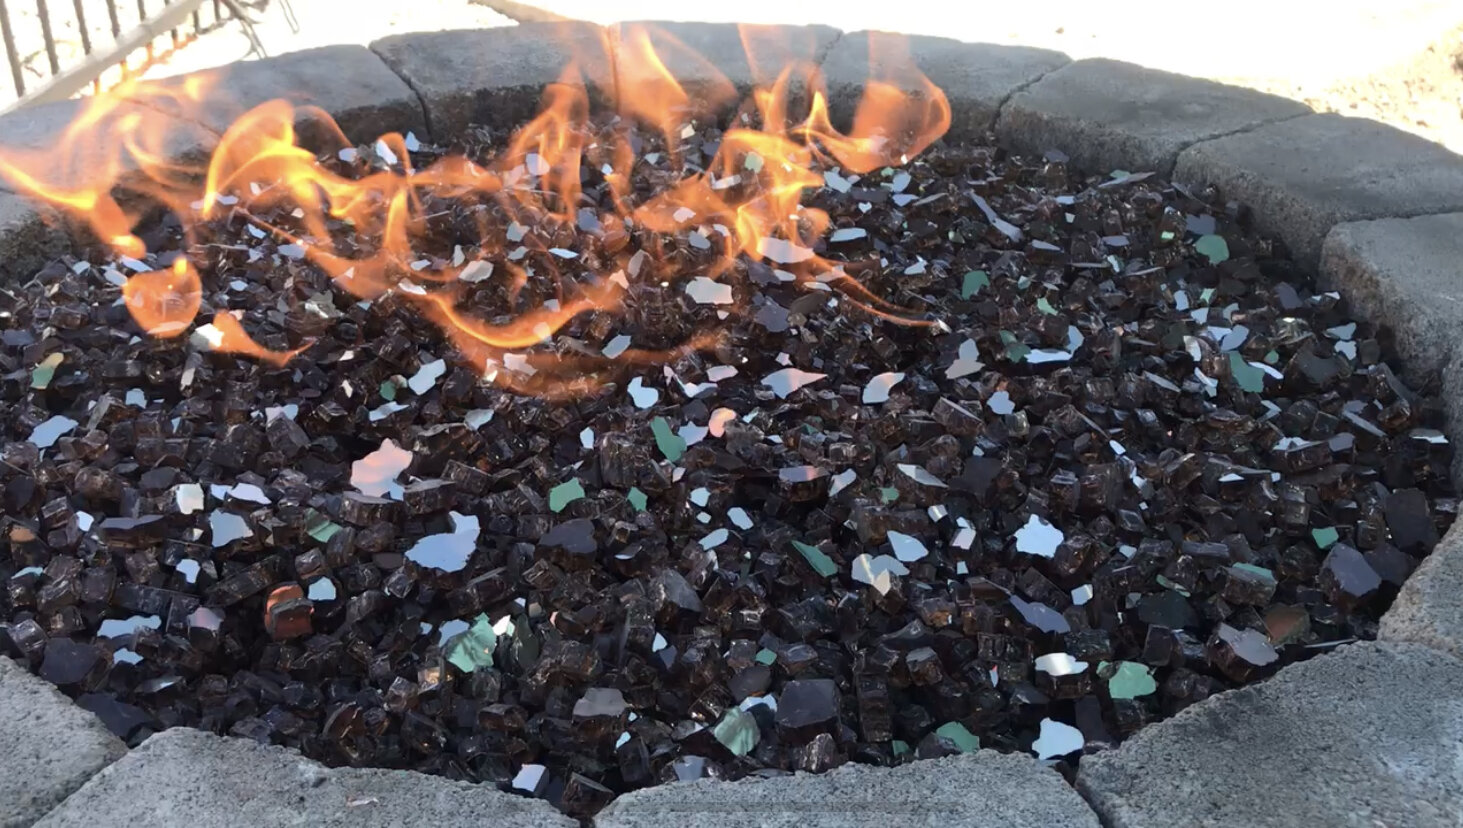 Diy Gas Fire Pit Build Maple Mtn, Using Lava Rock In Fire Pit